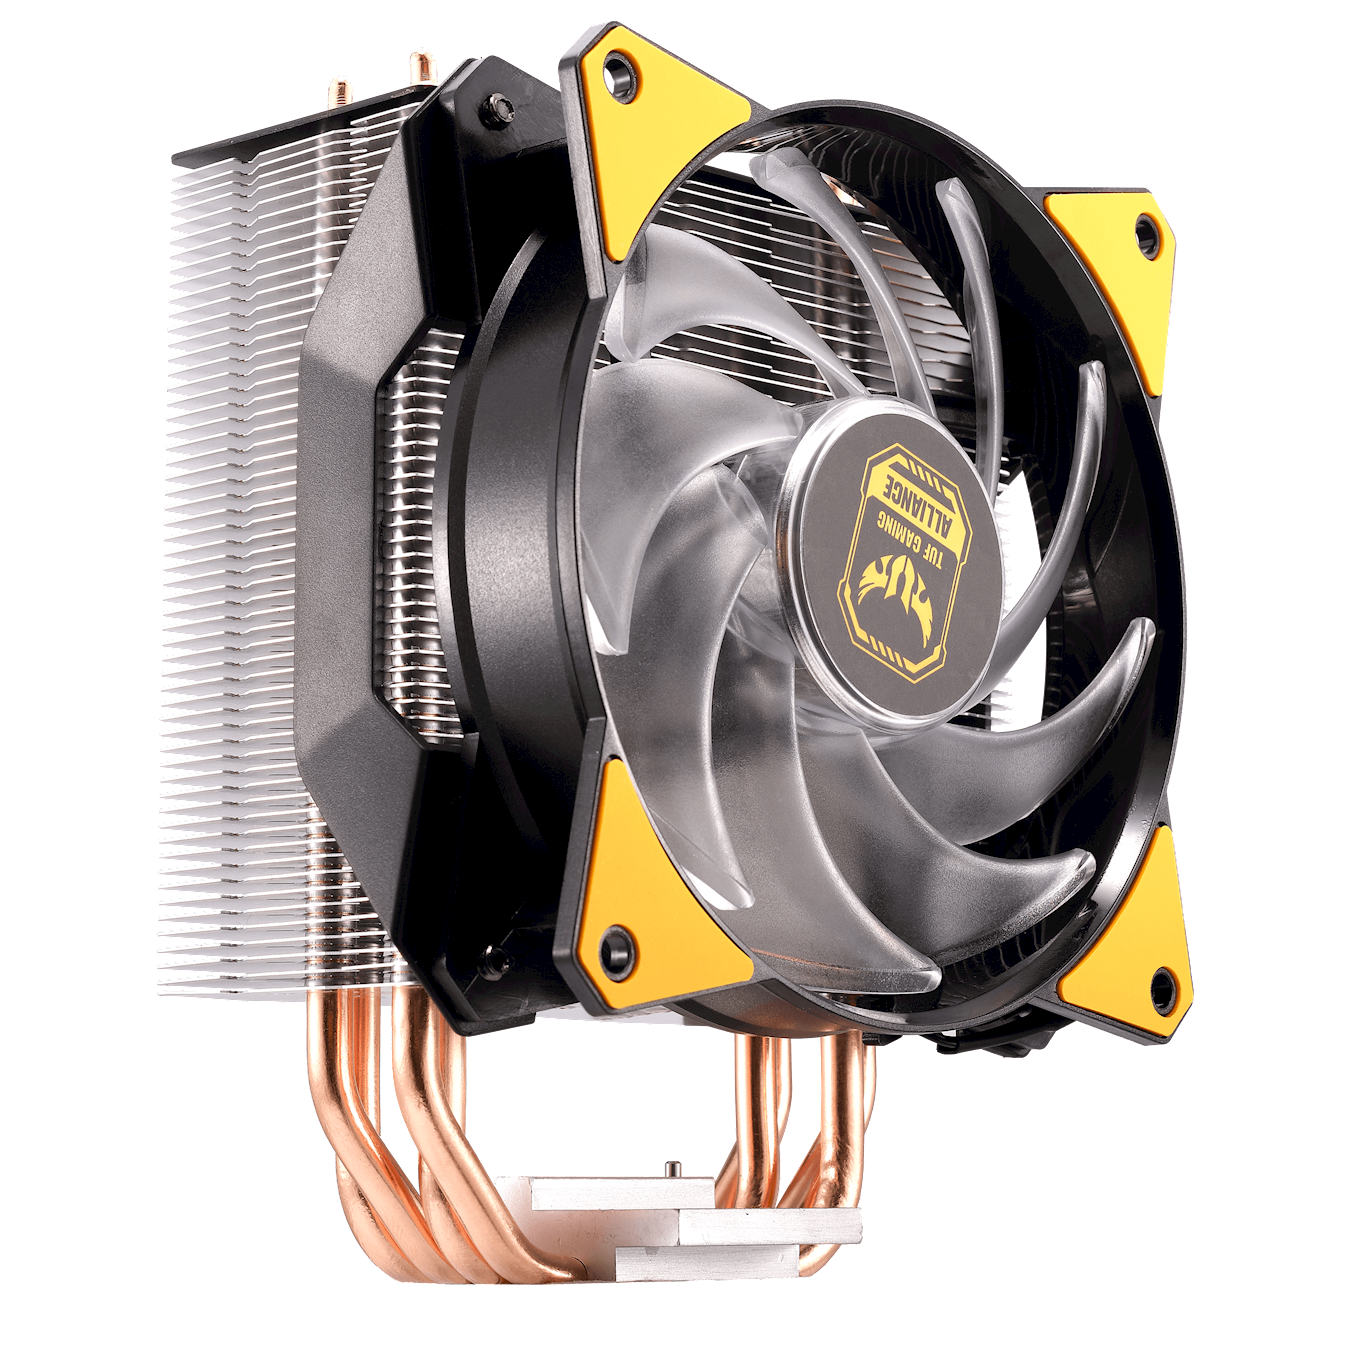 The stacked fin array ensures the least amount of airflow resistance allowing cooler air into the heatsink.